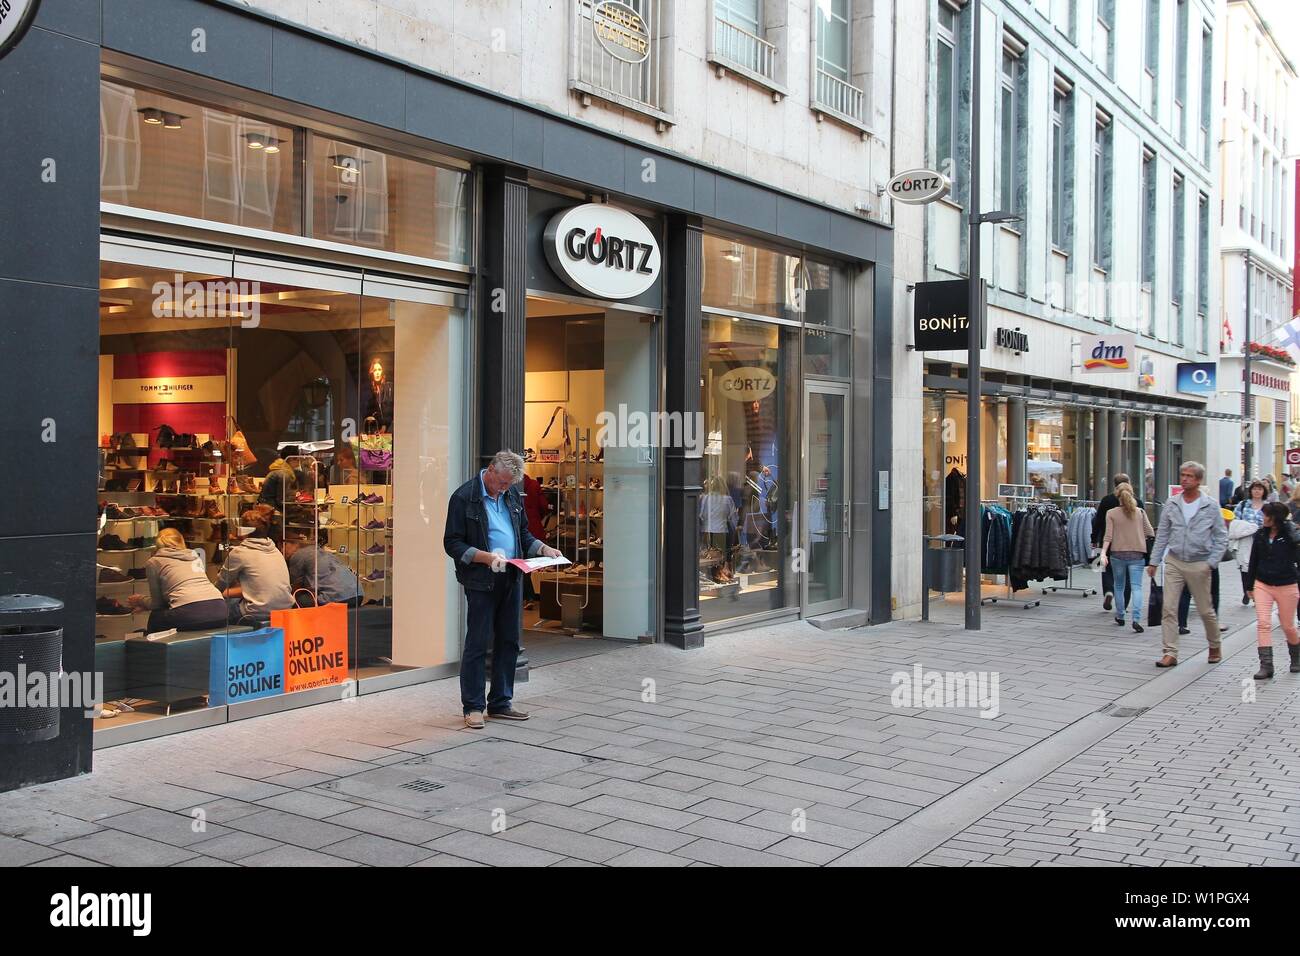 spin mus eller rotte grad Page 10 - Shoe Store Exterior High Resolution Stock Photography and Images  - Alamy